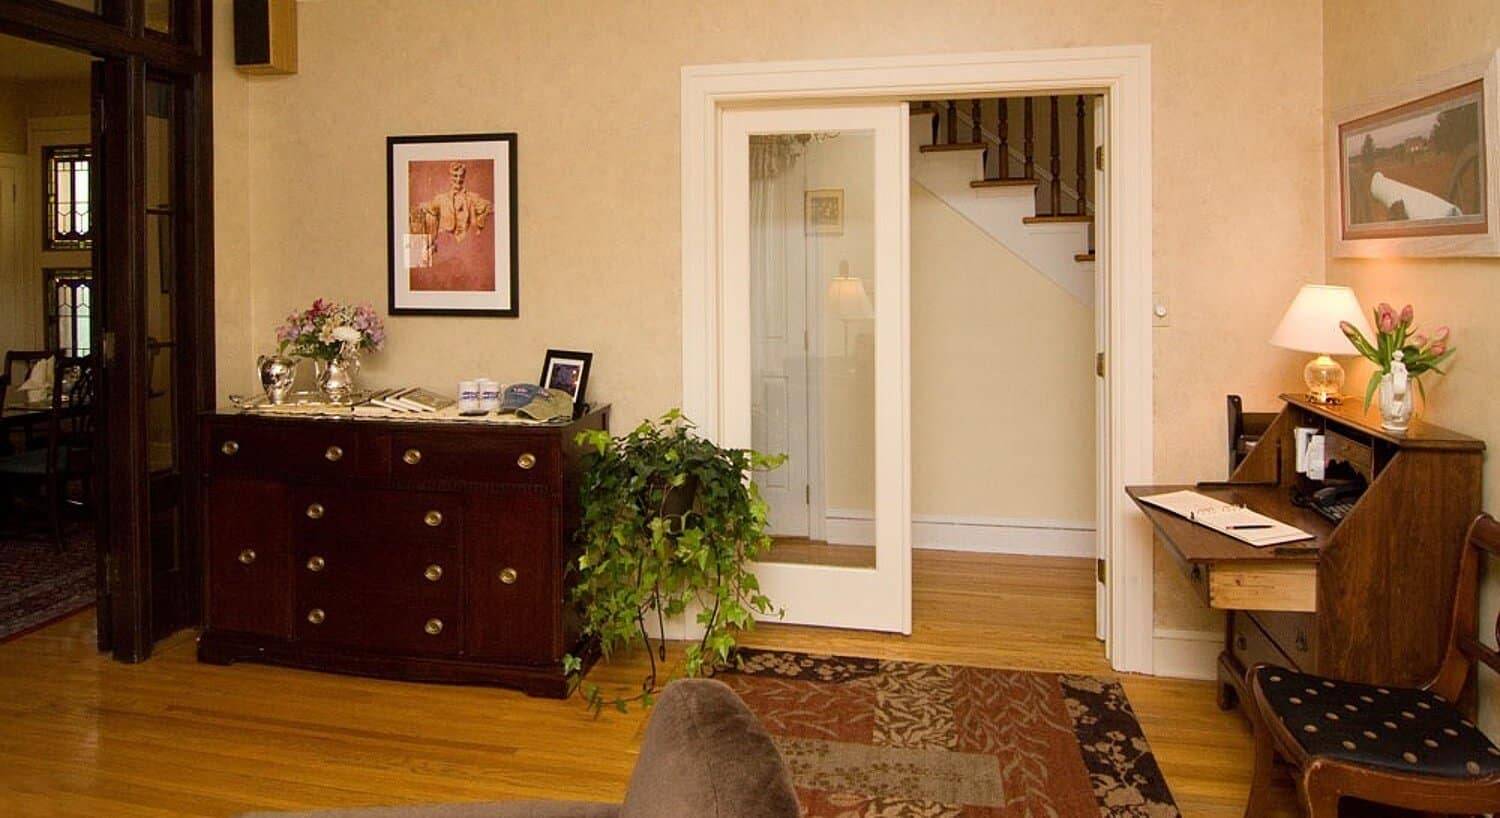 Foyer of a home with dresser, writing desk and French doors opening to a hallway with a staircase